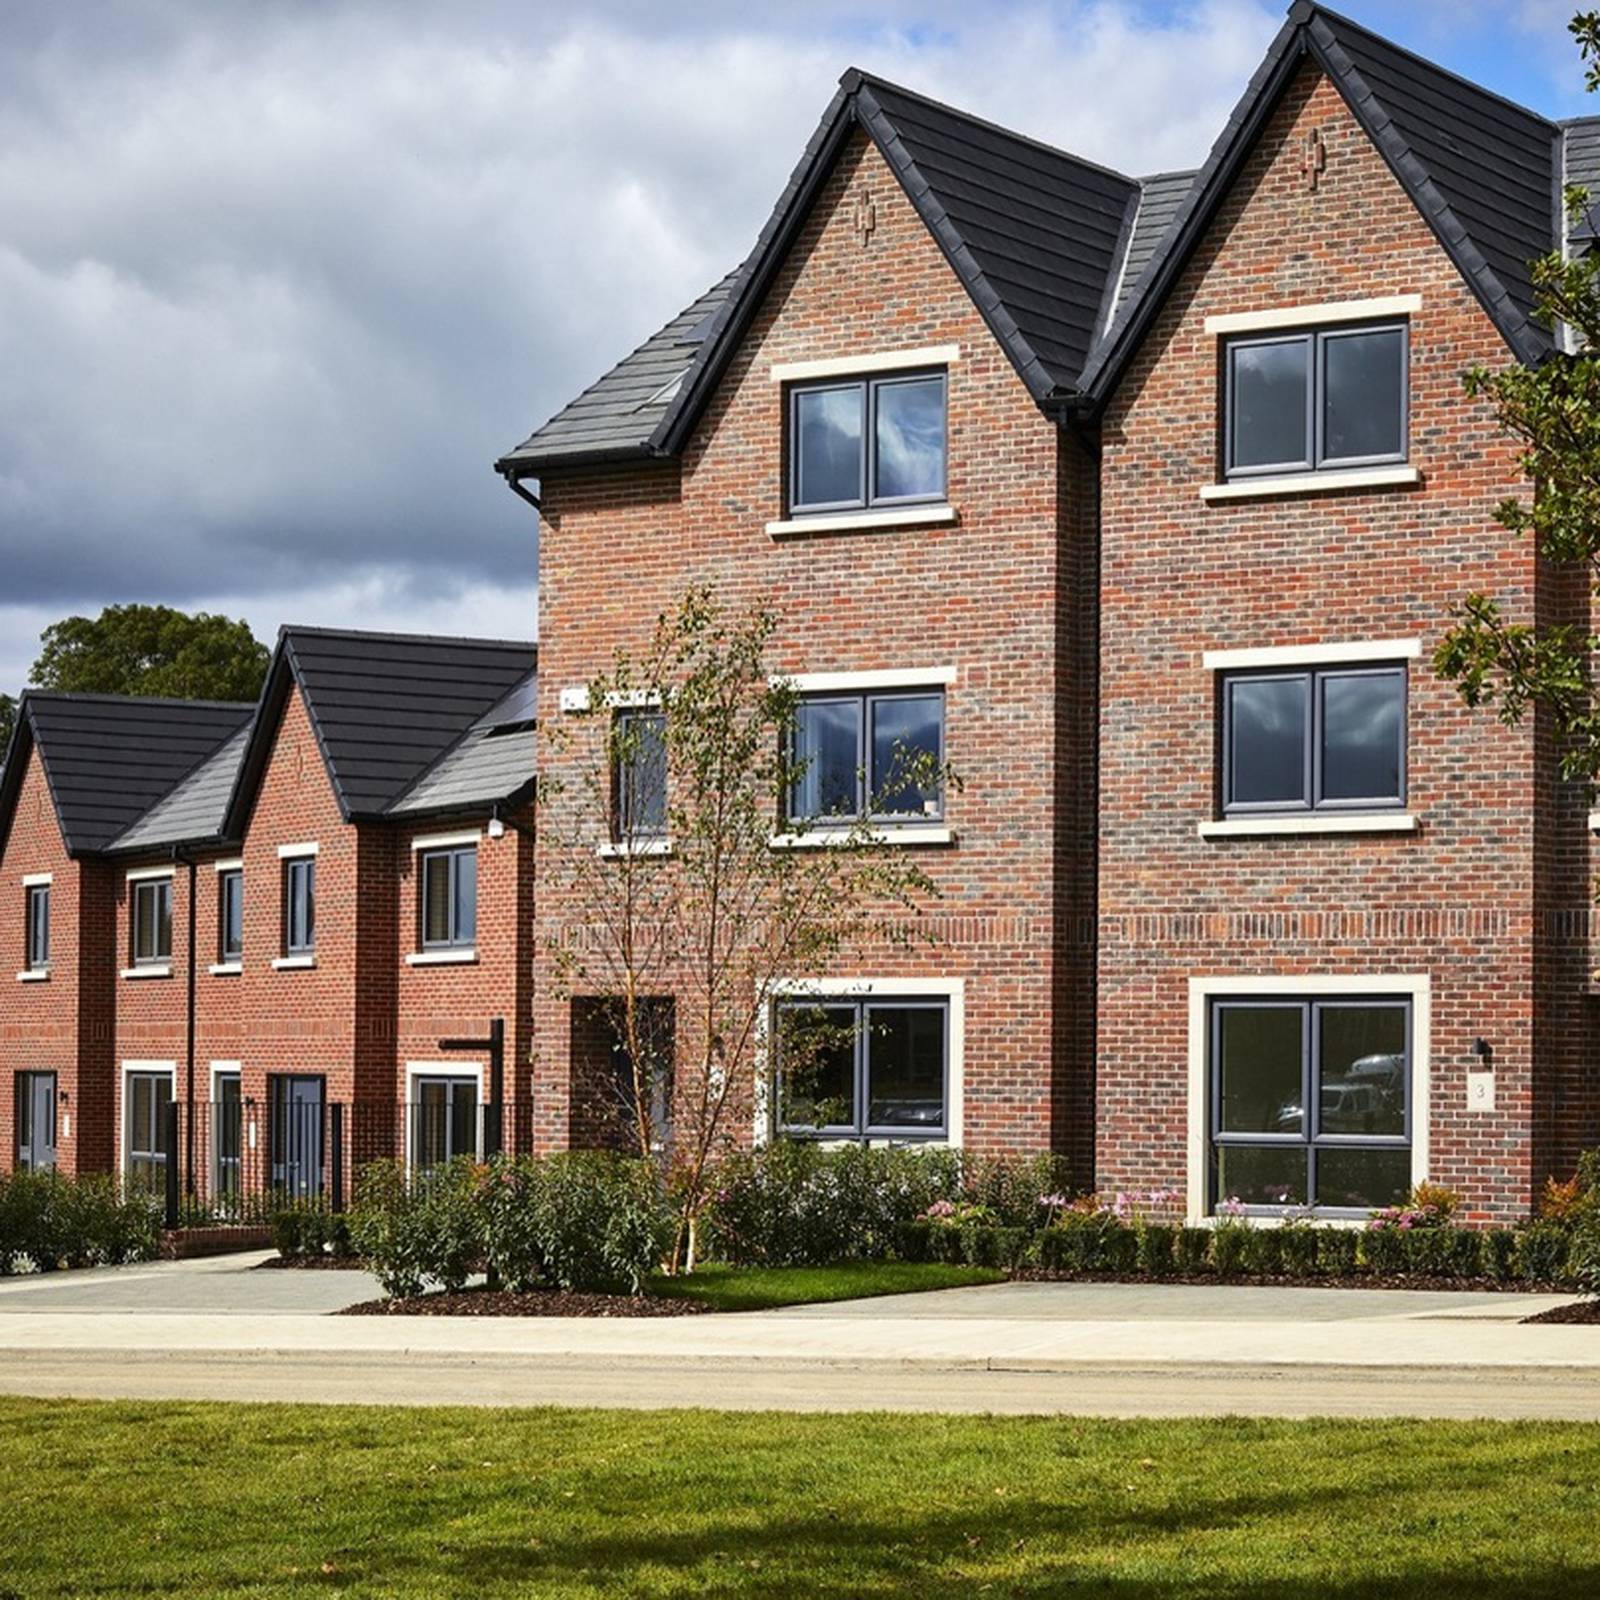 New Homes 2020: What's for sale in well-connected Kildare – The Irish Times